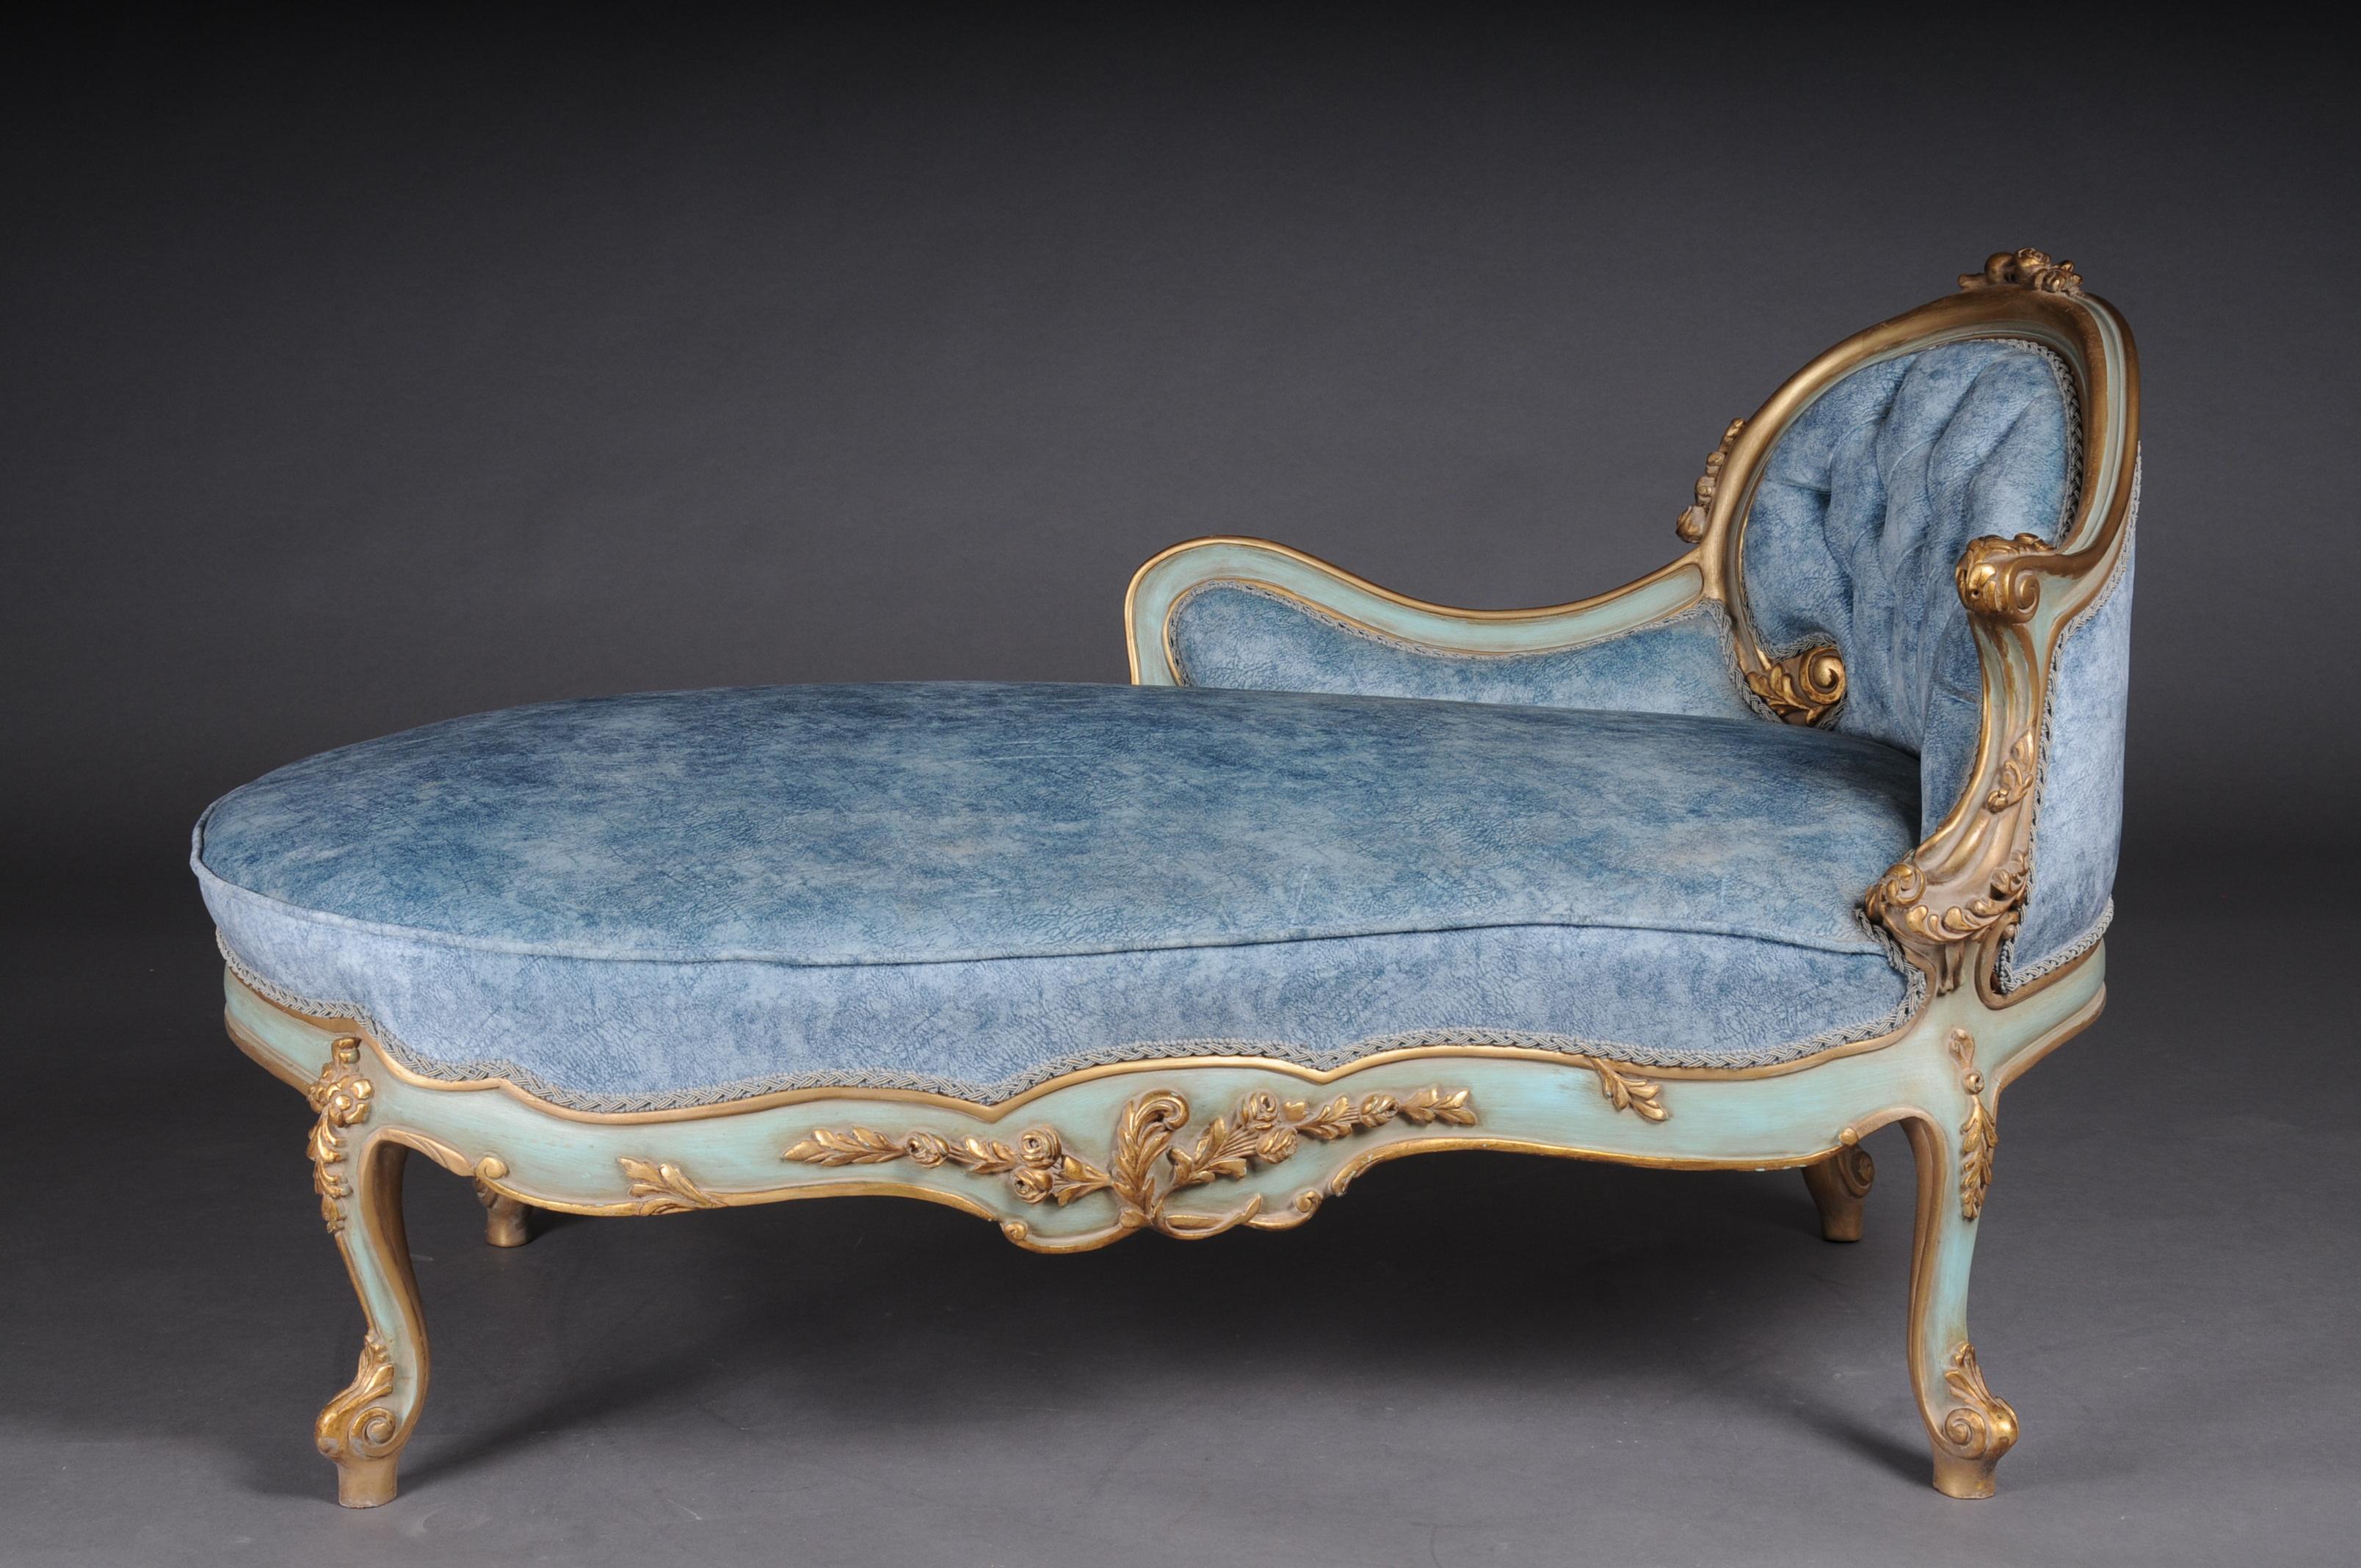 Unique Lounger, Chaise Longue, Recamiere in Louis XV Style In Good Condition For Sale In Berlin, DE